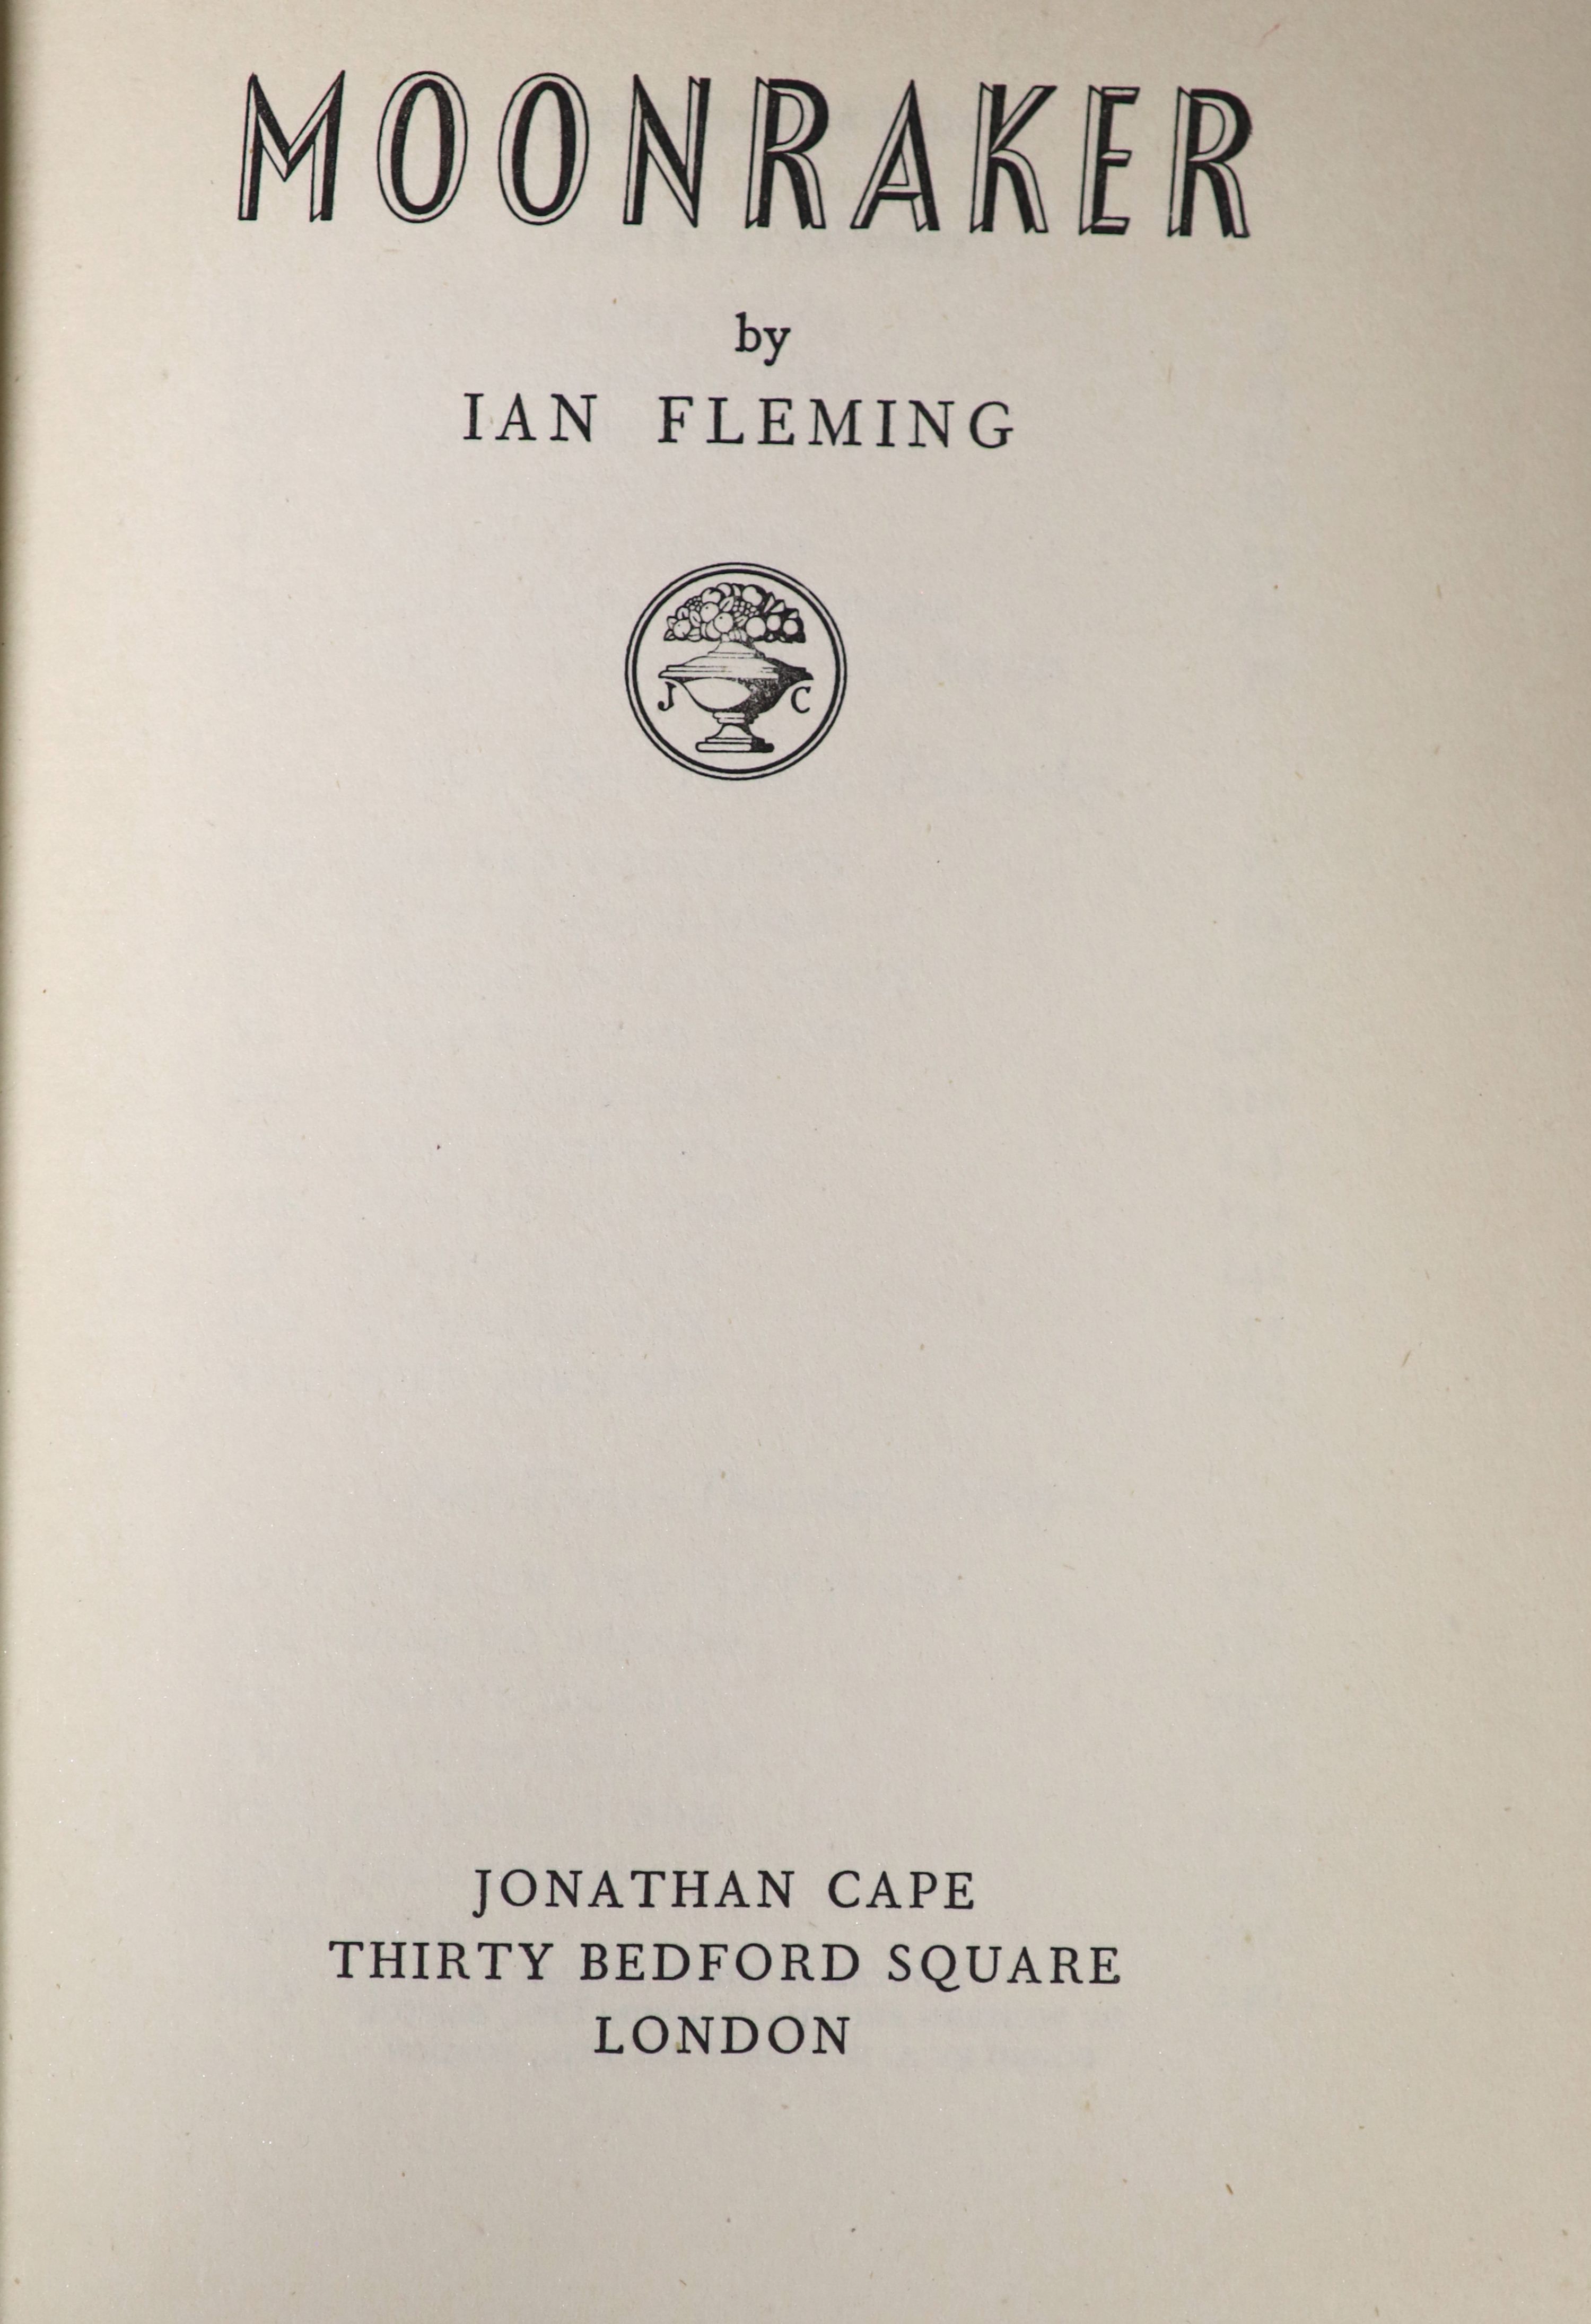 Fleming, Ian - Moonraker, 1st edition, 2nd state, original black cloth with silver titles, London, 1955